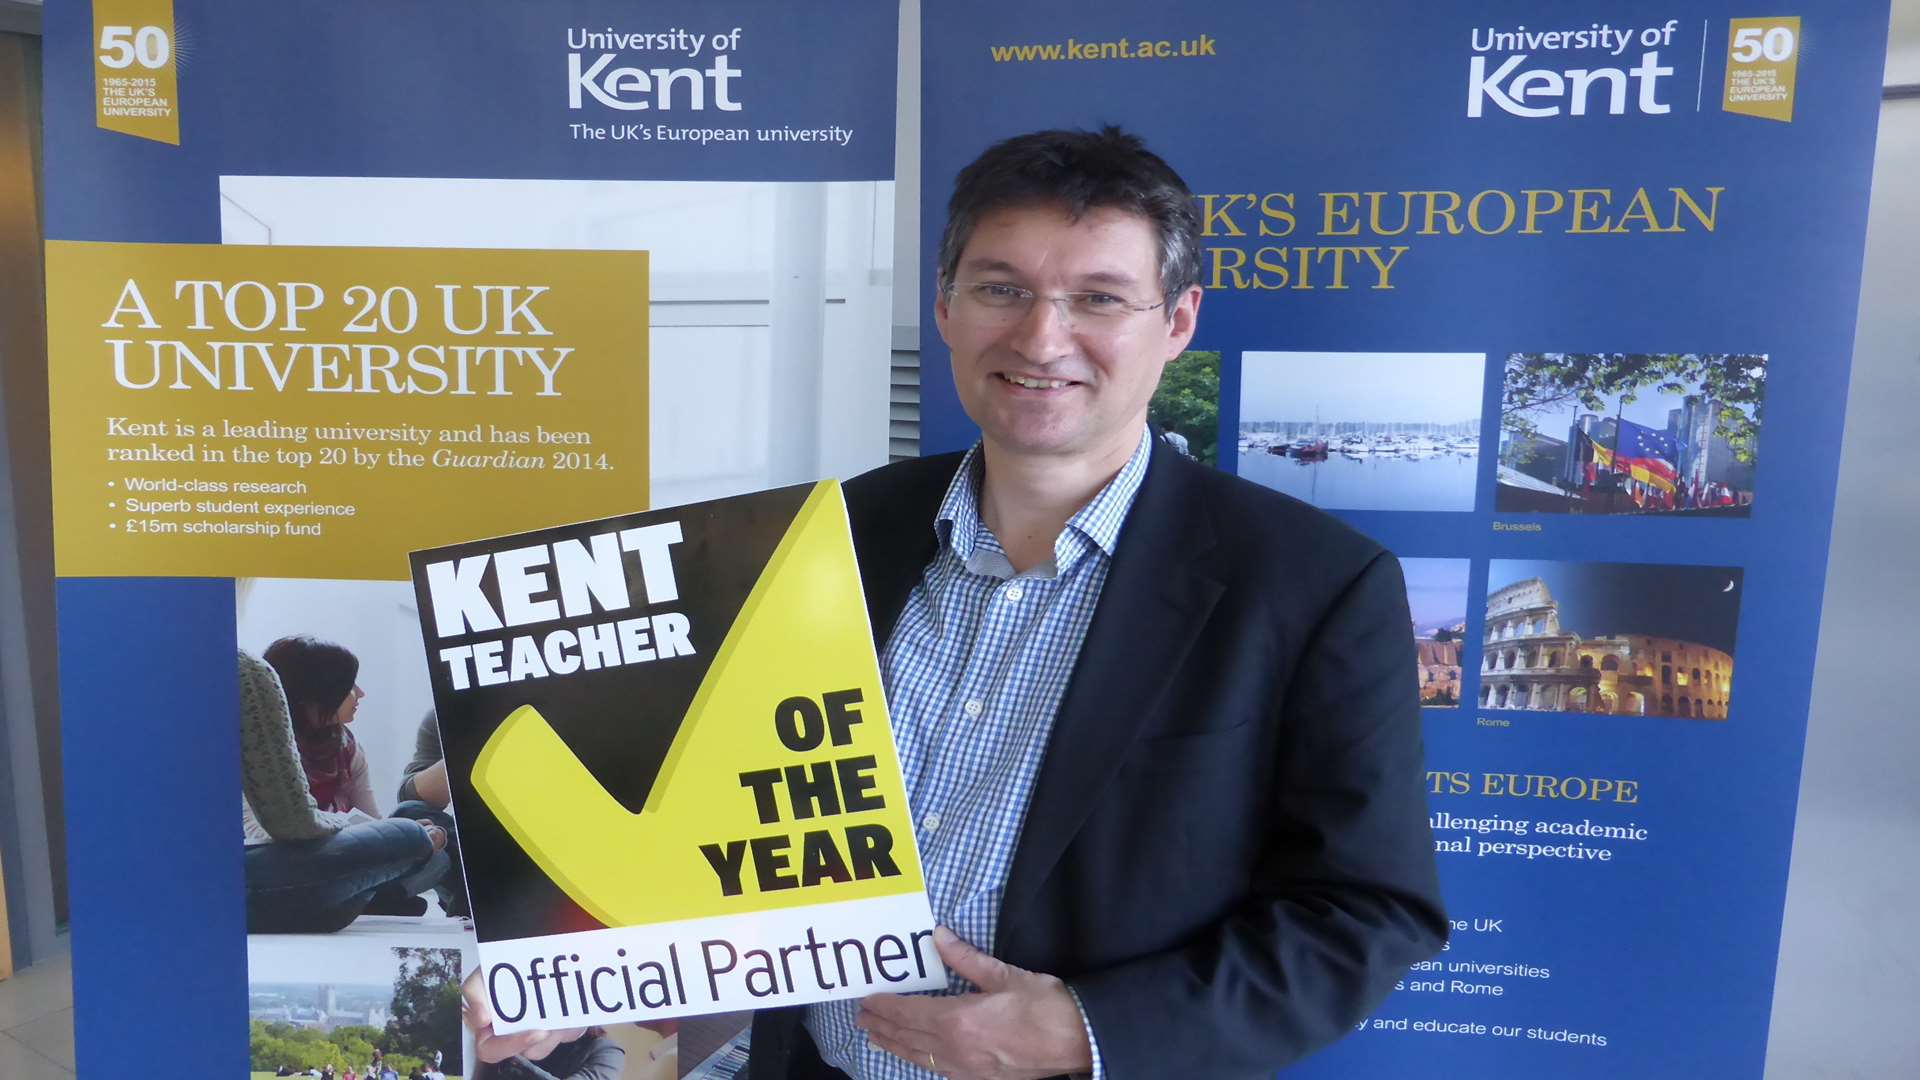 Prof Richard Whitman announces the University of Kent's support for a new category at the Kent Teacher of the Year Awards - The Kent Politics and Citizenship Award.